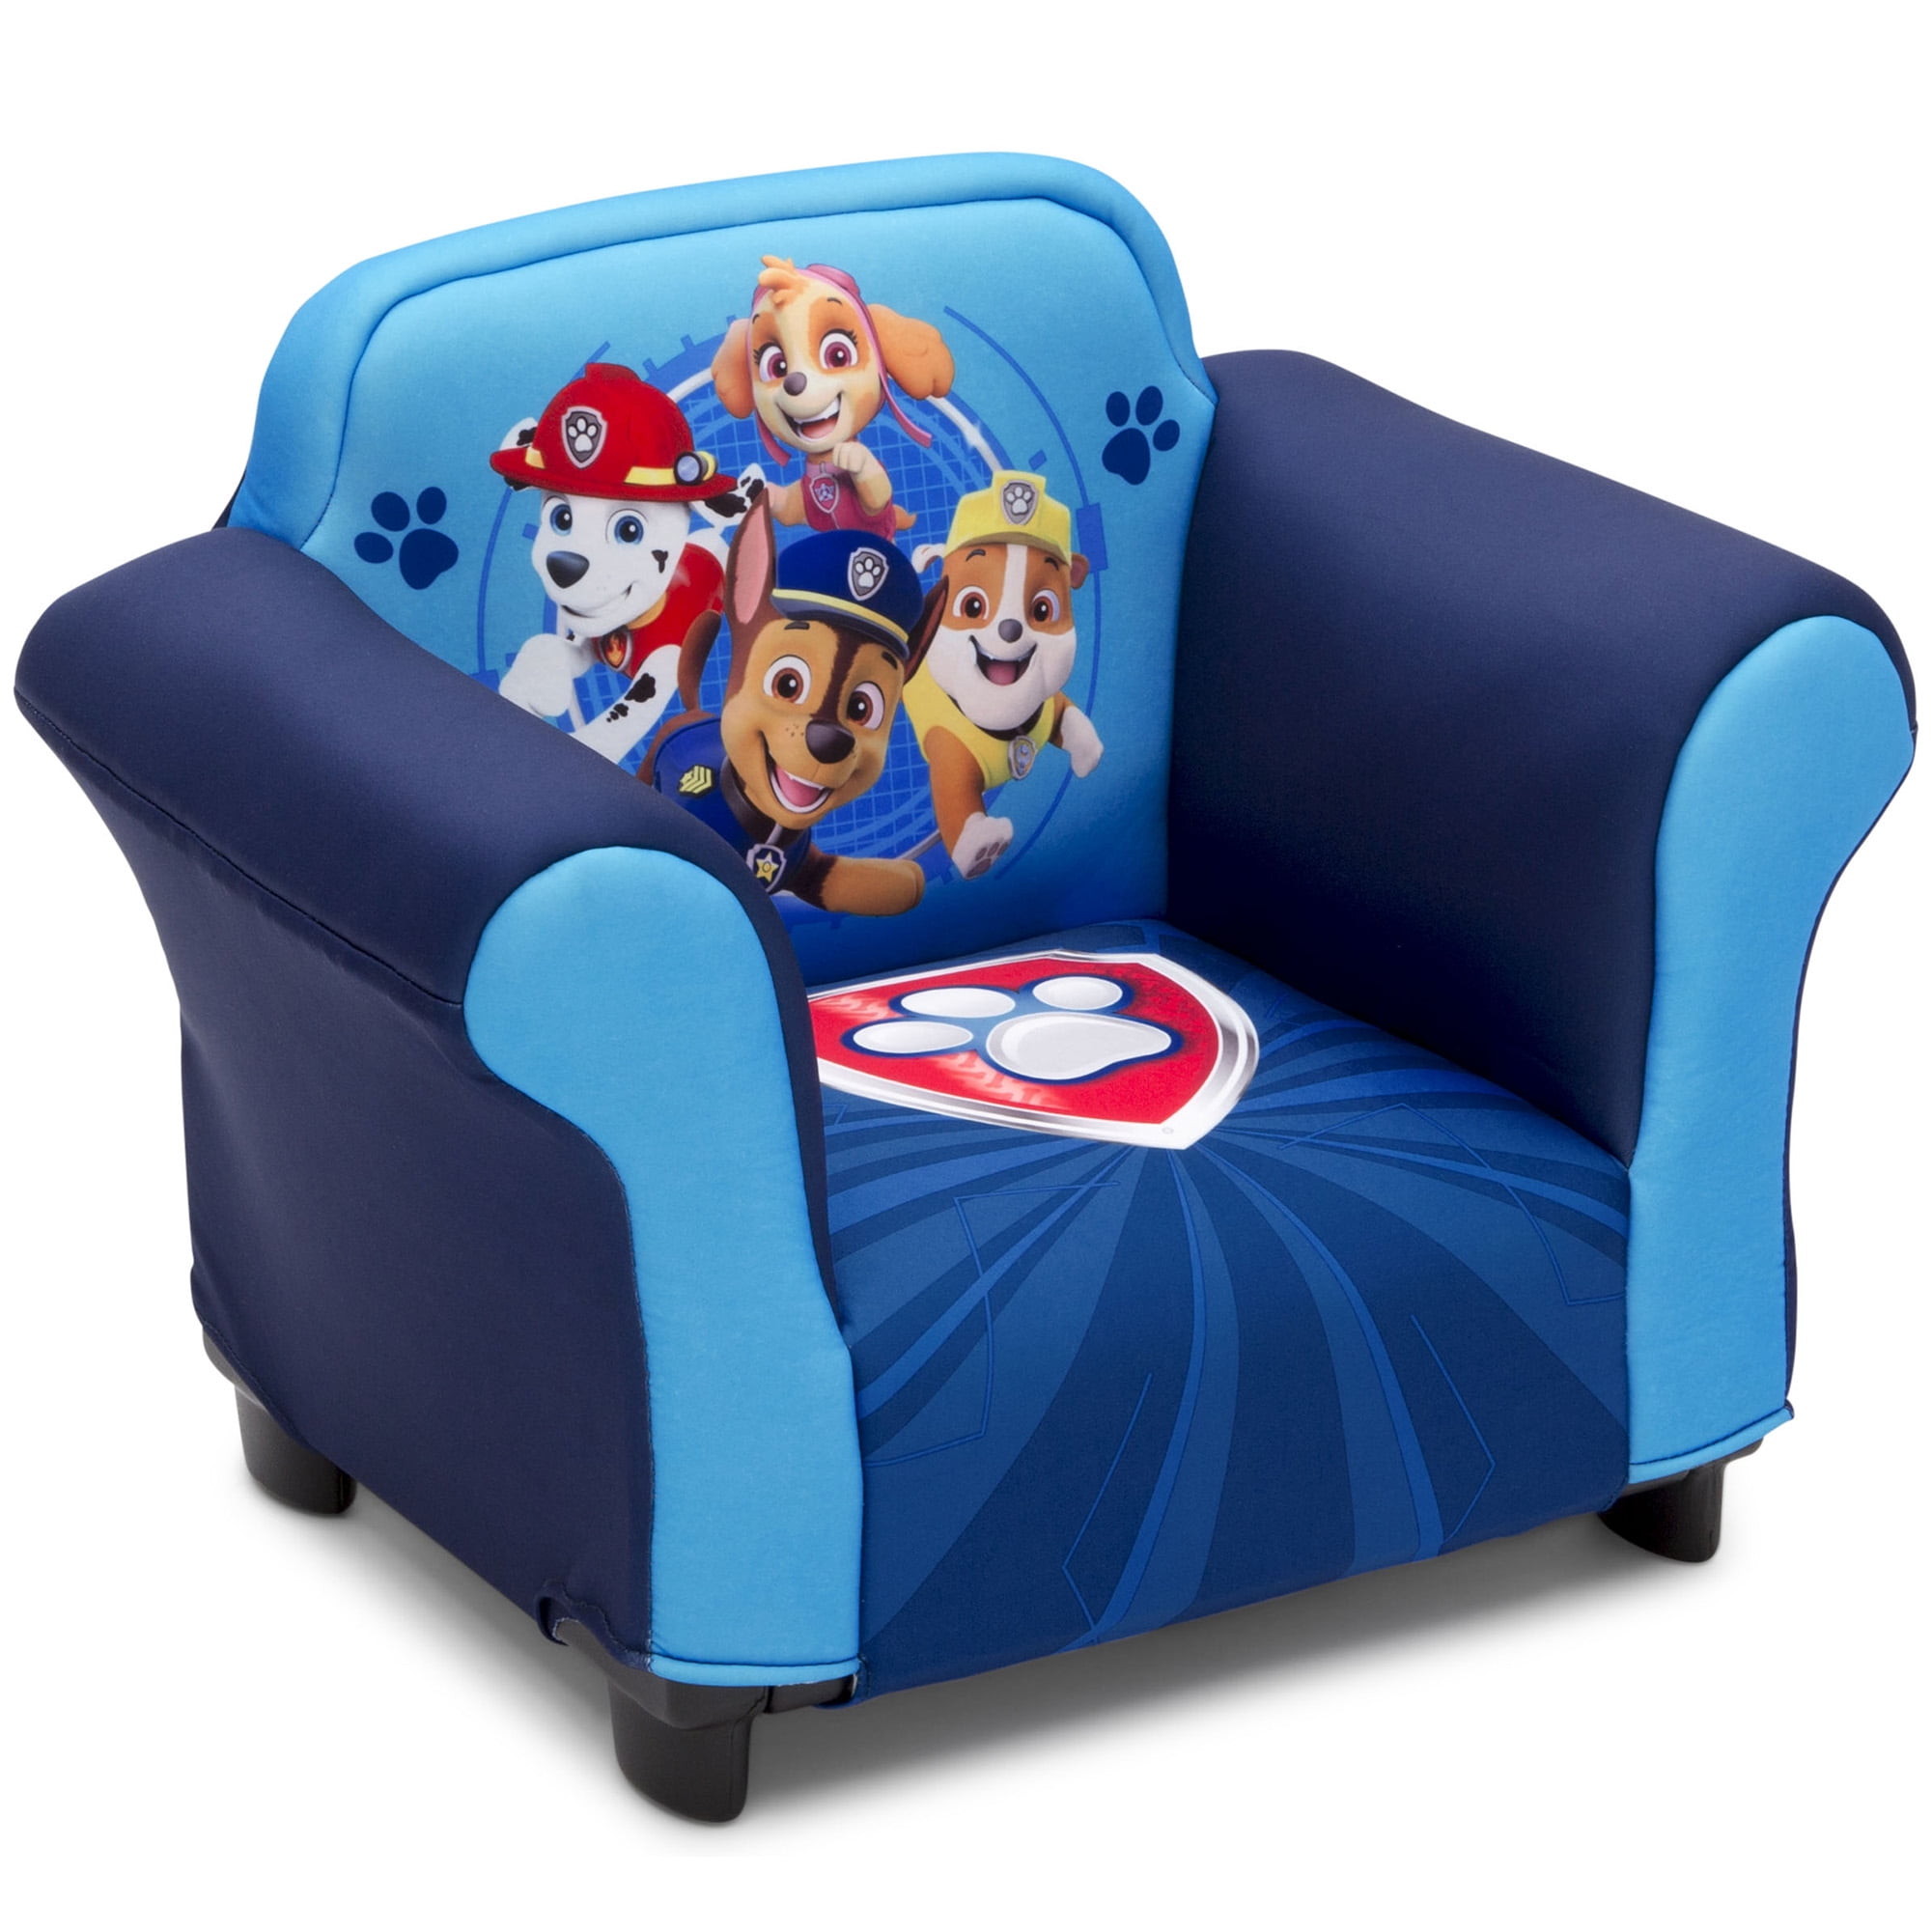 Paw Patrol Childrens Upholstered Chair 